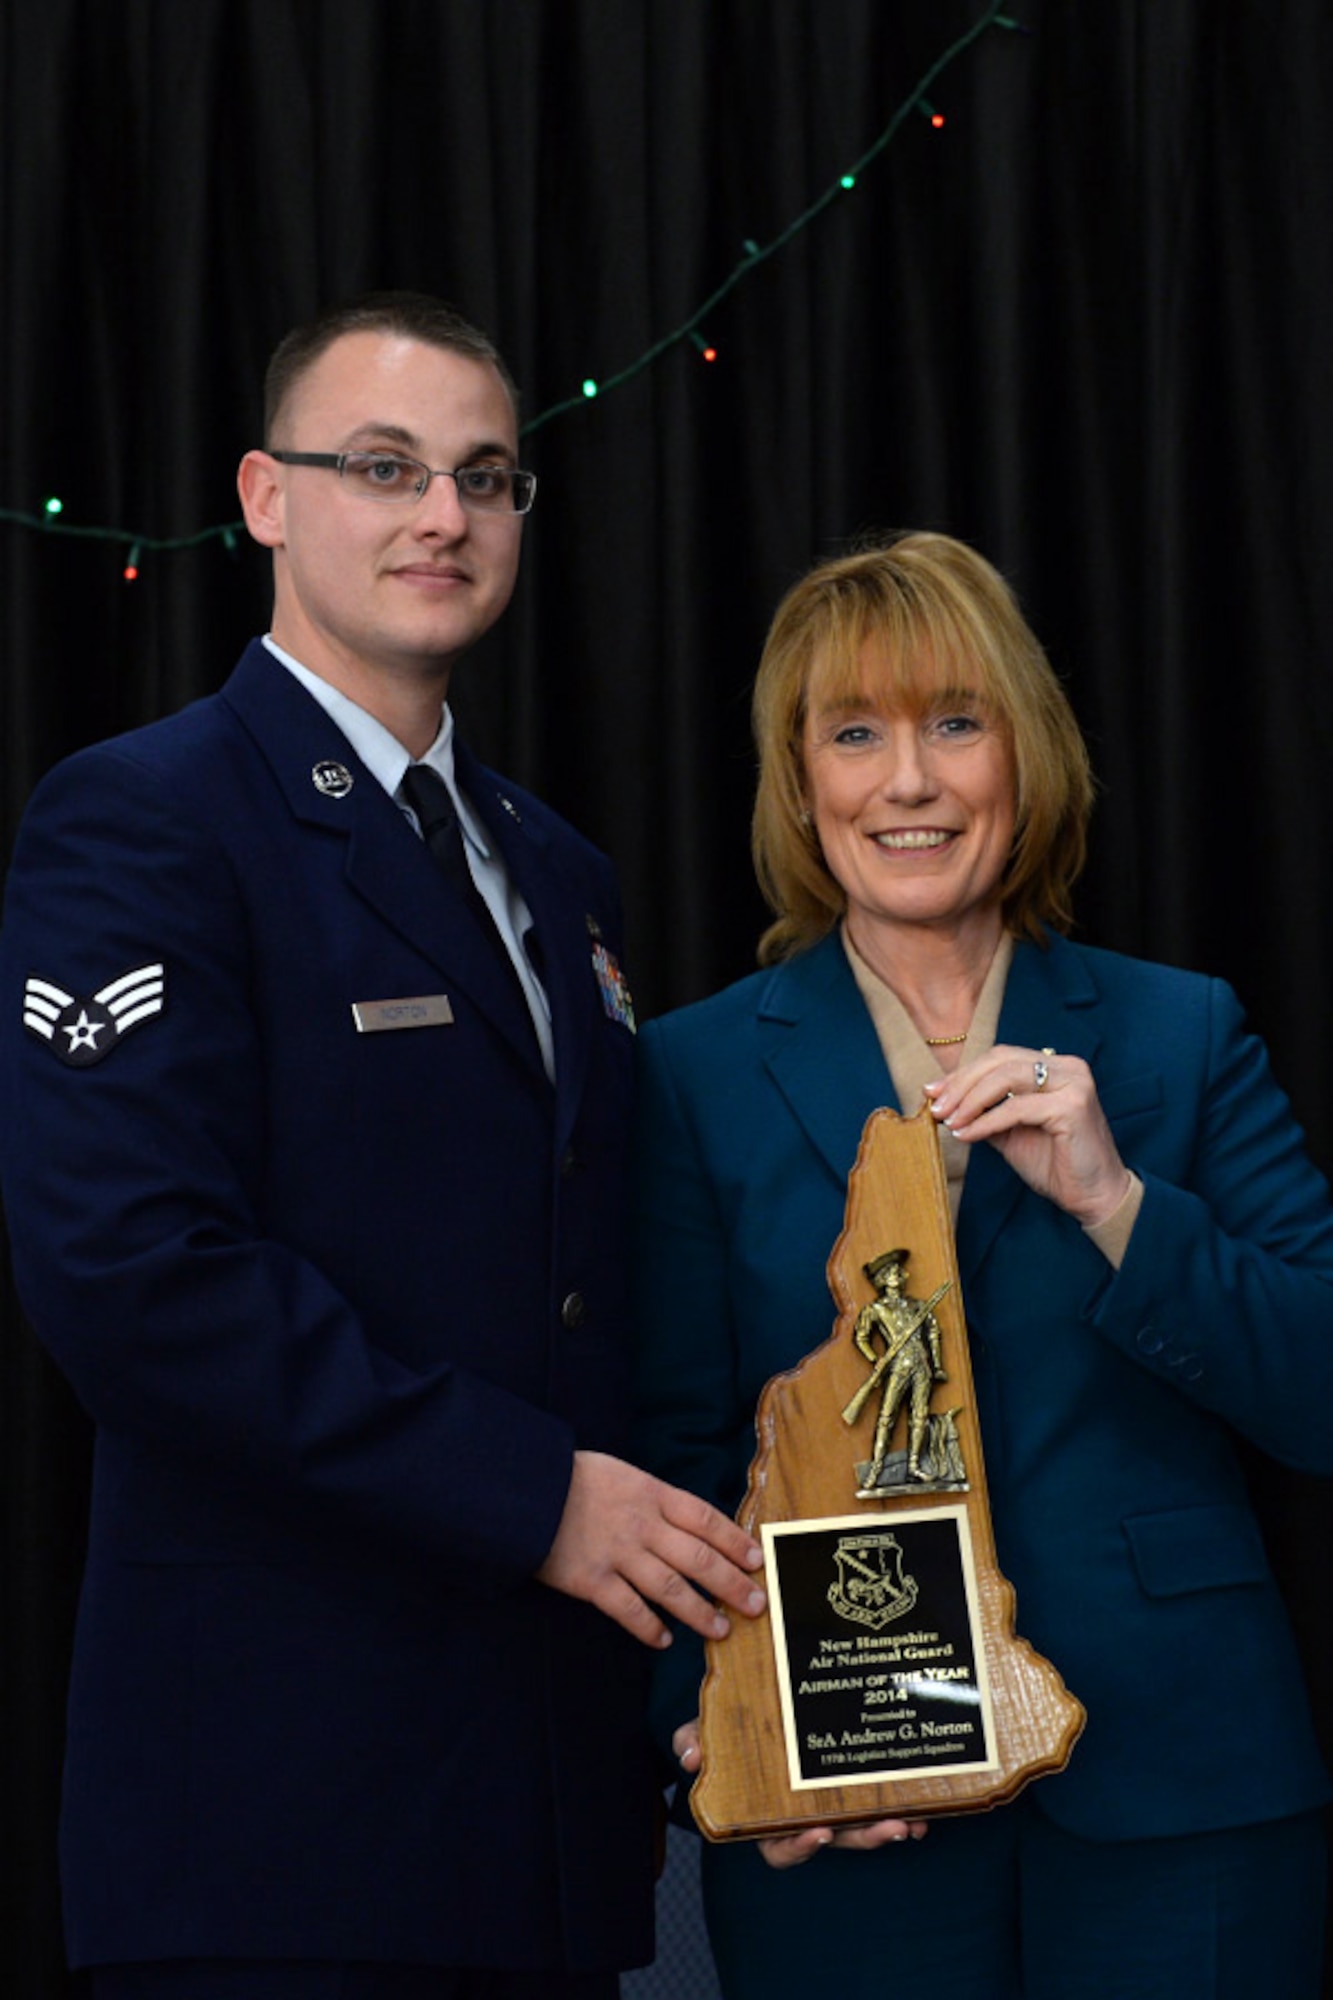 Senior Airman Andrew Norton with the 157th Logistics Readiness Squadron is presented the 157th Air Refueling Wing's Airman of the Year award by N.H. Governor Maggie Hassan, Pease Air National Guard Base, N.H., Dec 7, 2014. (Air National Guard photo by Staff Sgt. Curtis J. Lenz/Released)